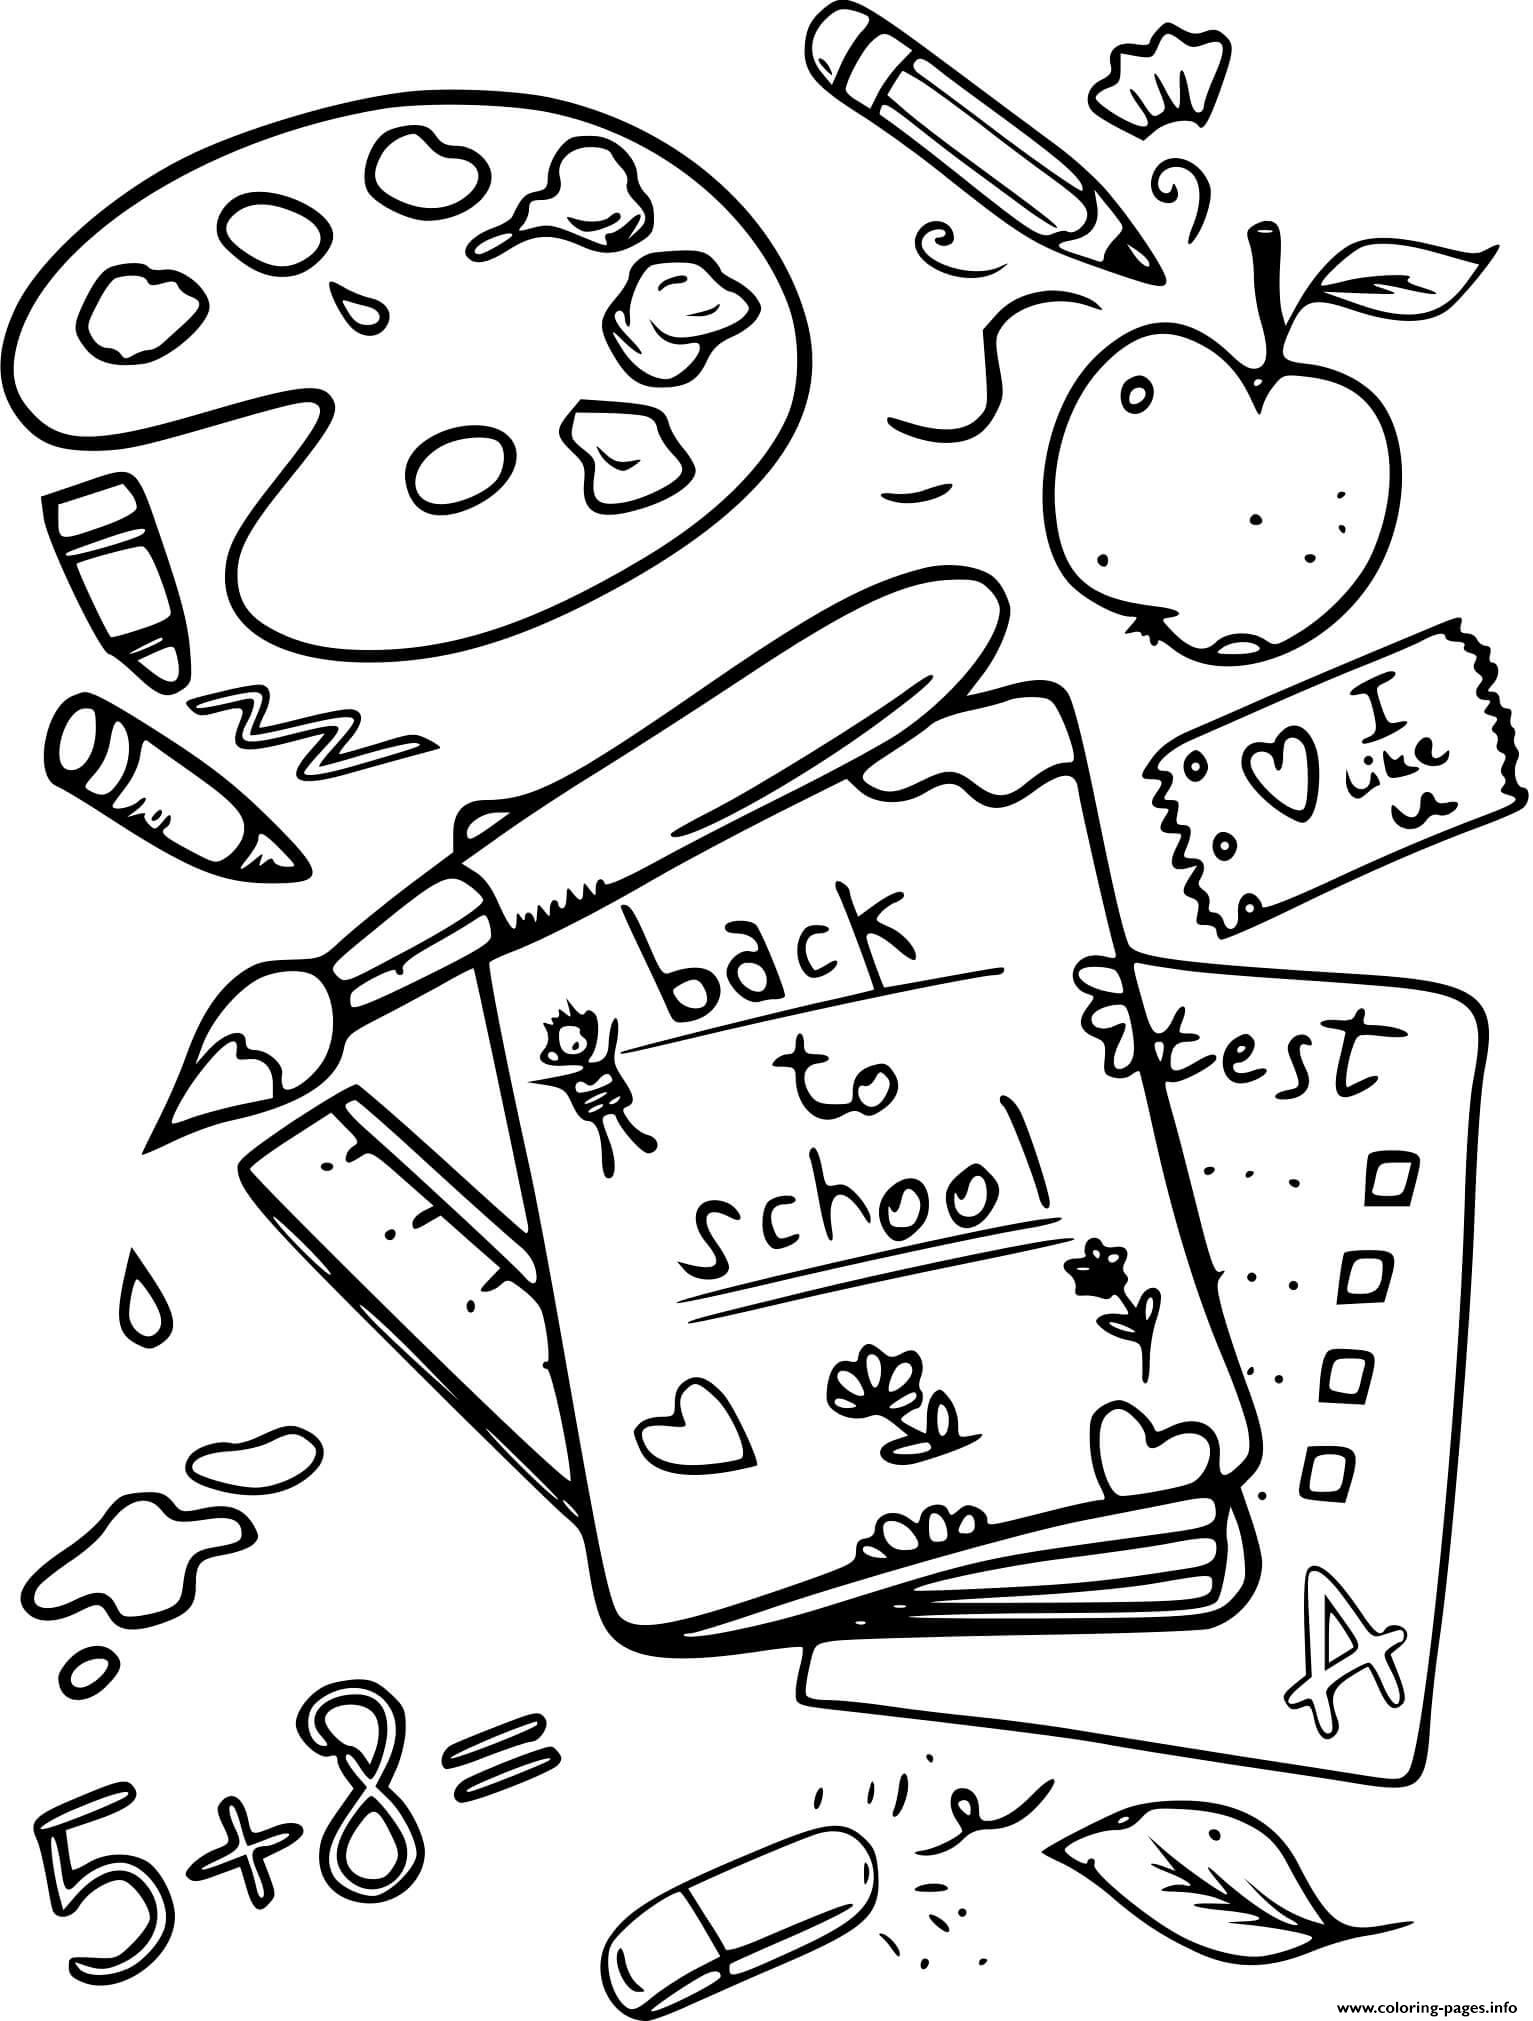 Math Reading Writing Back Toschool Classes coloring